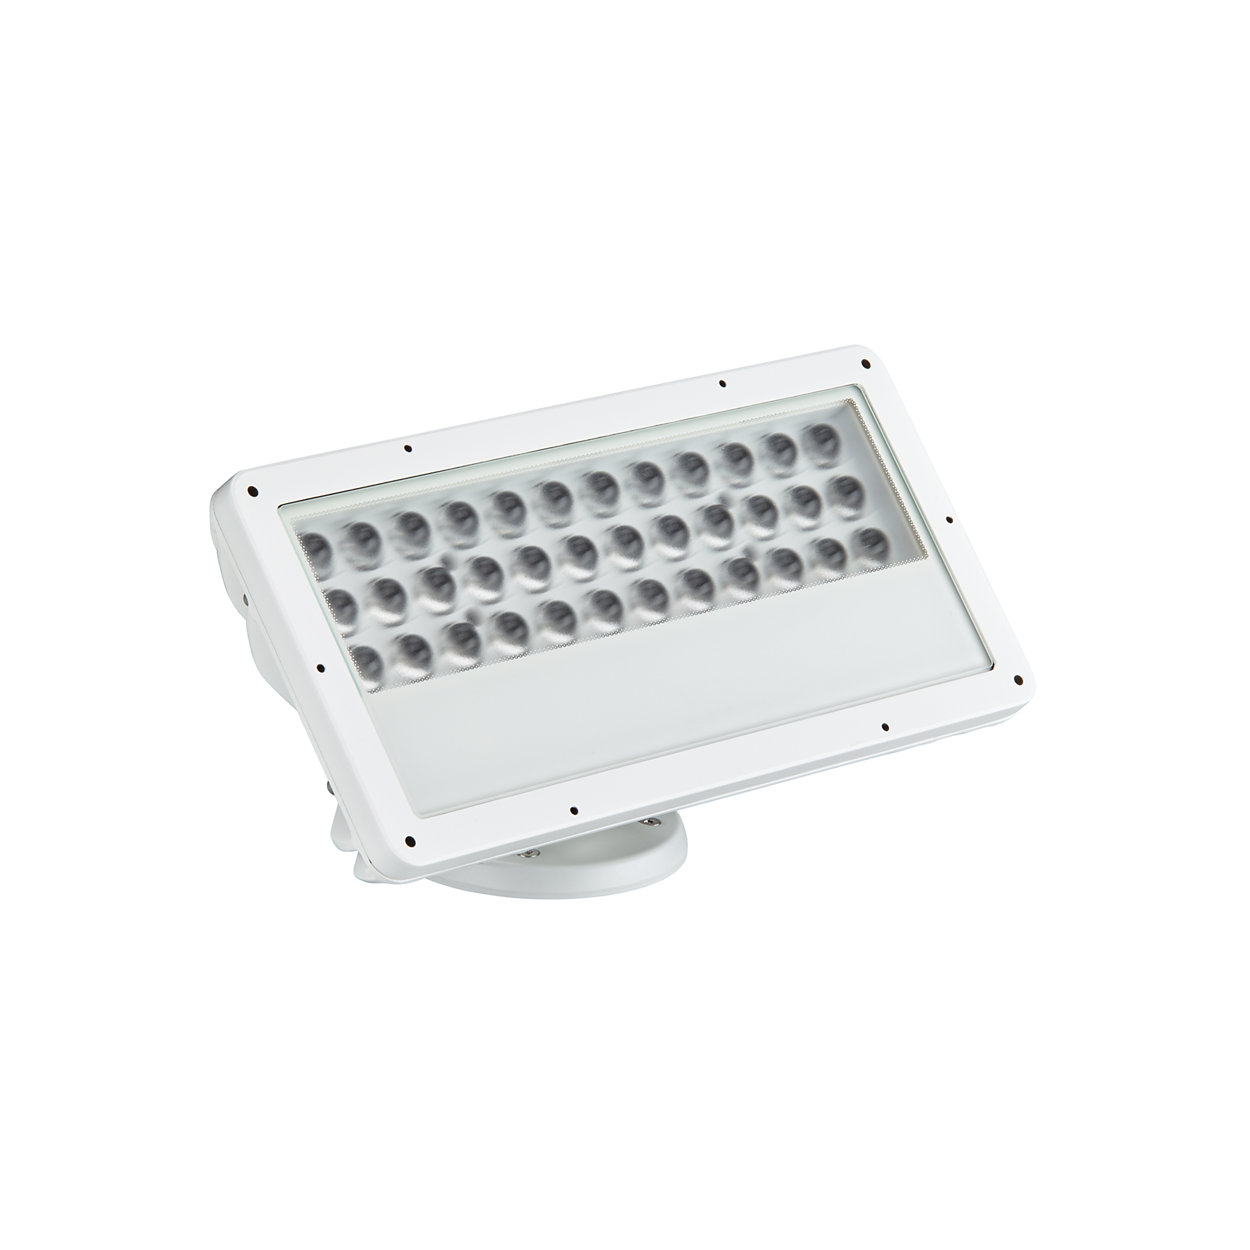 ColorBlast IntelliHue Powercore gen4 - high-quality tunable white light